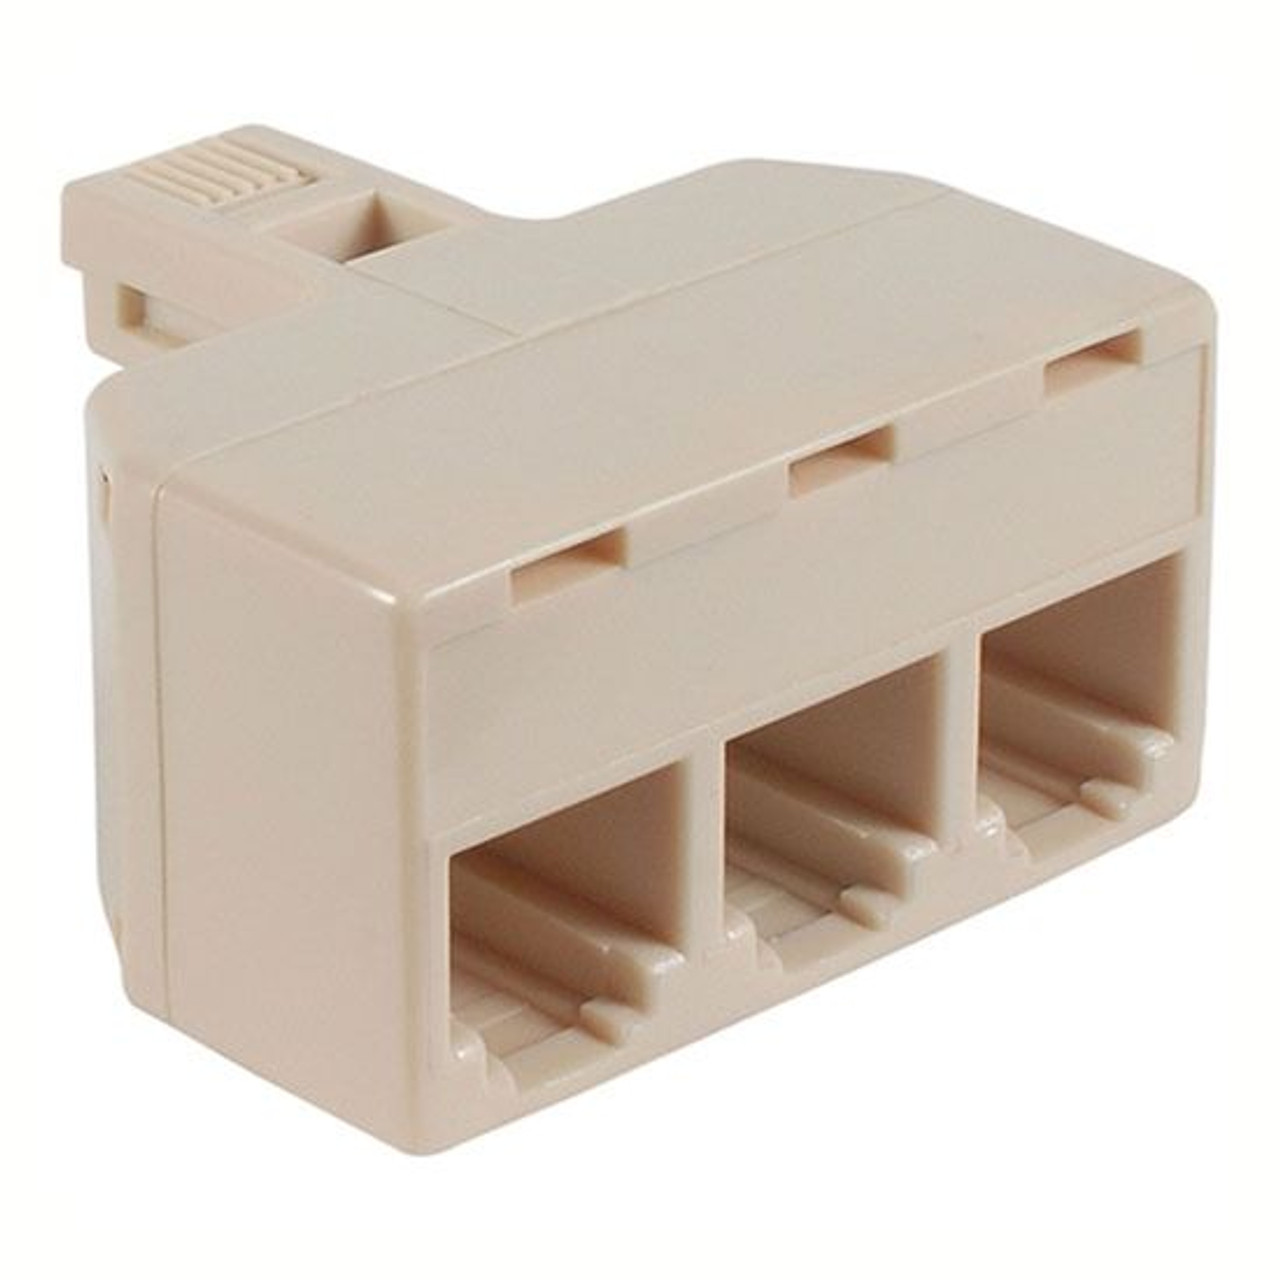 Steren 300-124IV 3 Way Jack Telephone Modular Ivory TEE 4-Conductor RJ11 3-Jack 1-Plug Adapter Phone Wall Divider Line Cord Splitter Data Signal Cable Triple Connector Outlet Snap-In Component